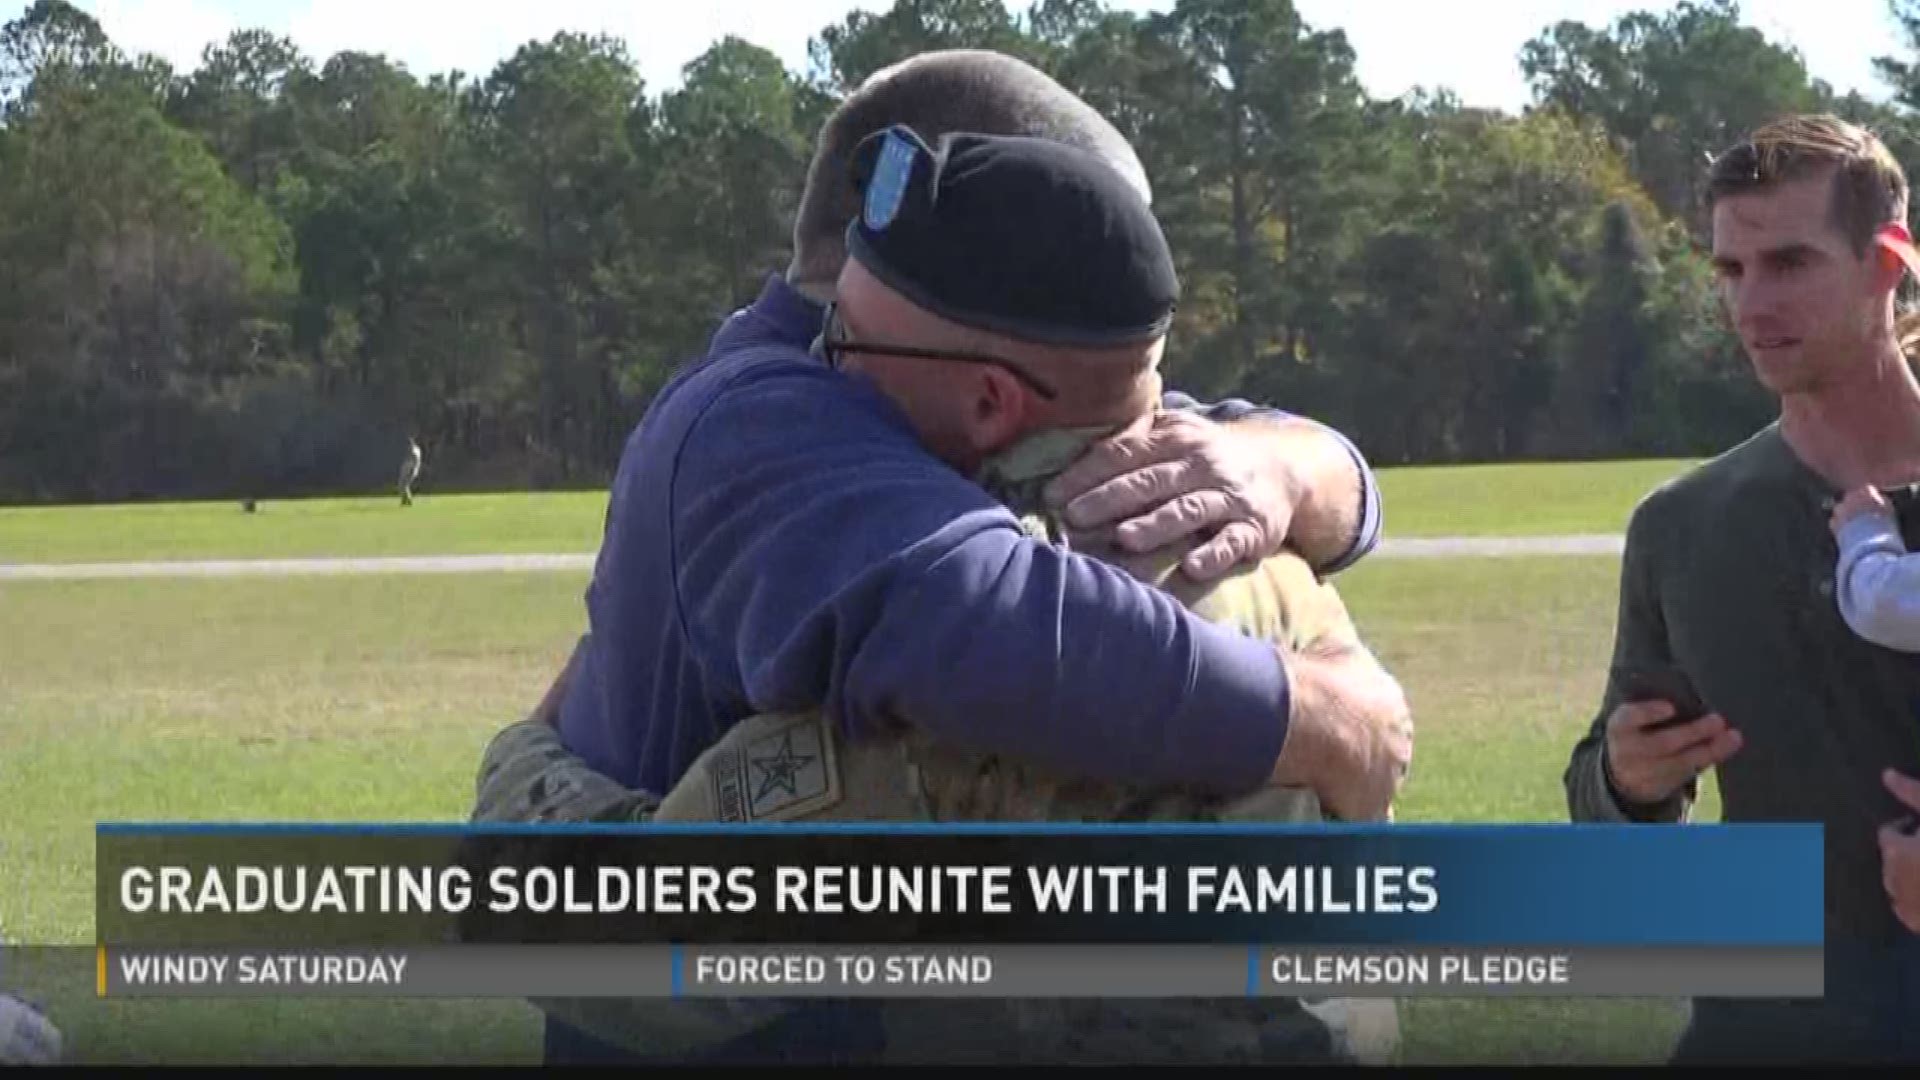 After 10 grueling weeks of basic combat training at Fort Jackson, graduating soldiers reunite with Families at Family Day.